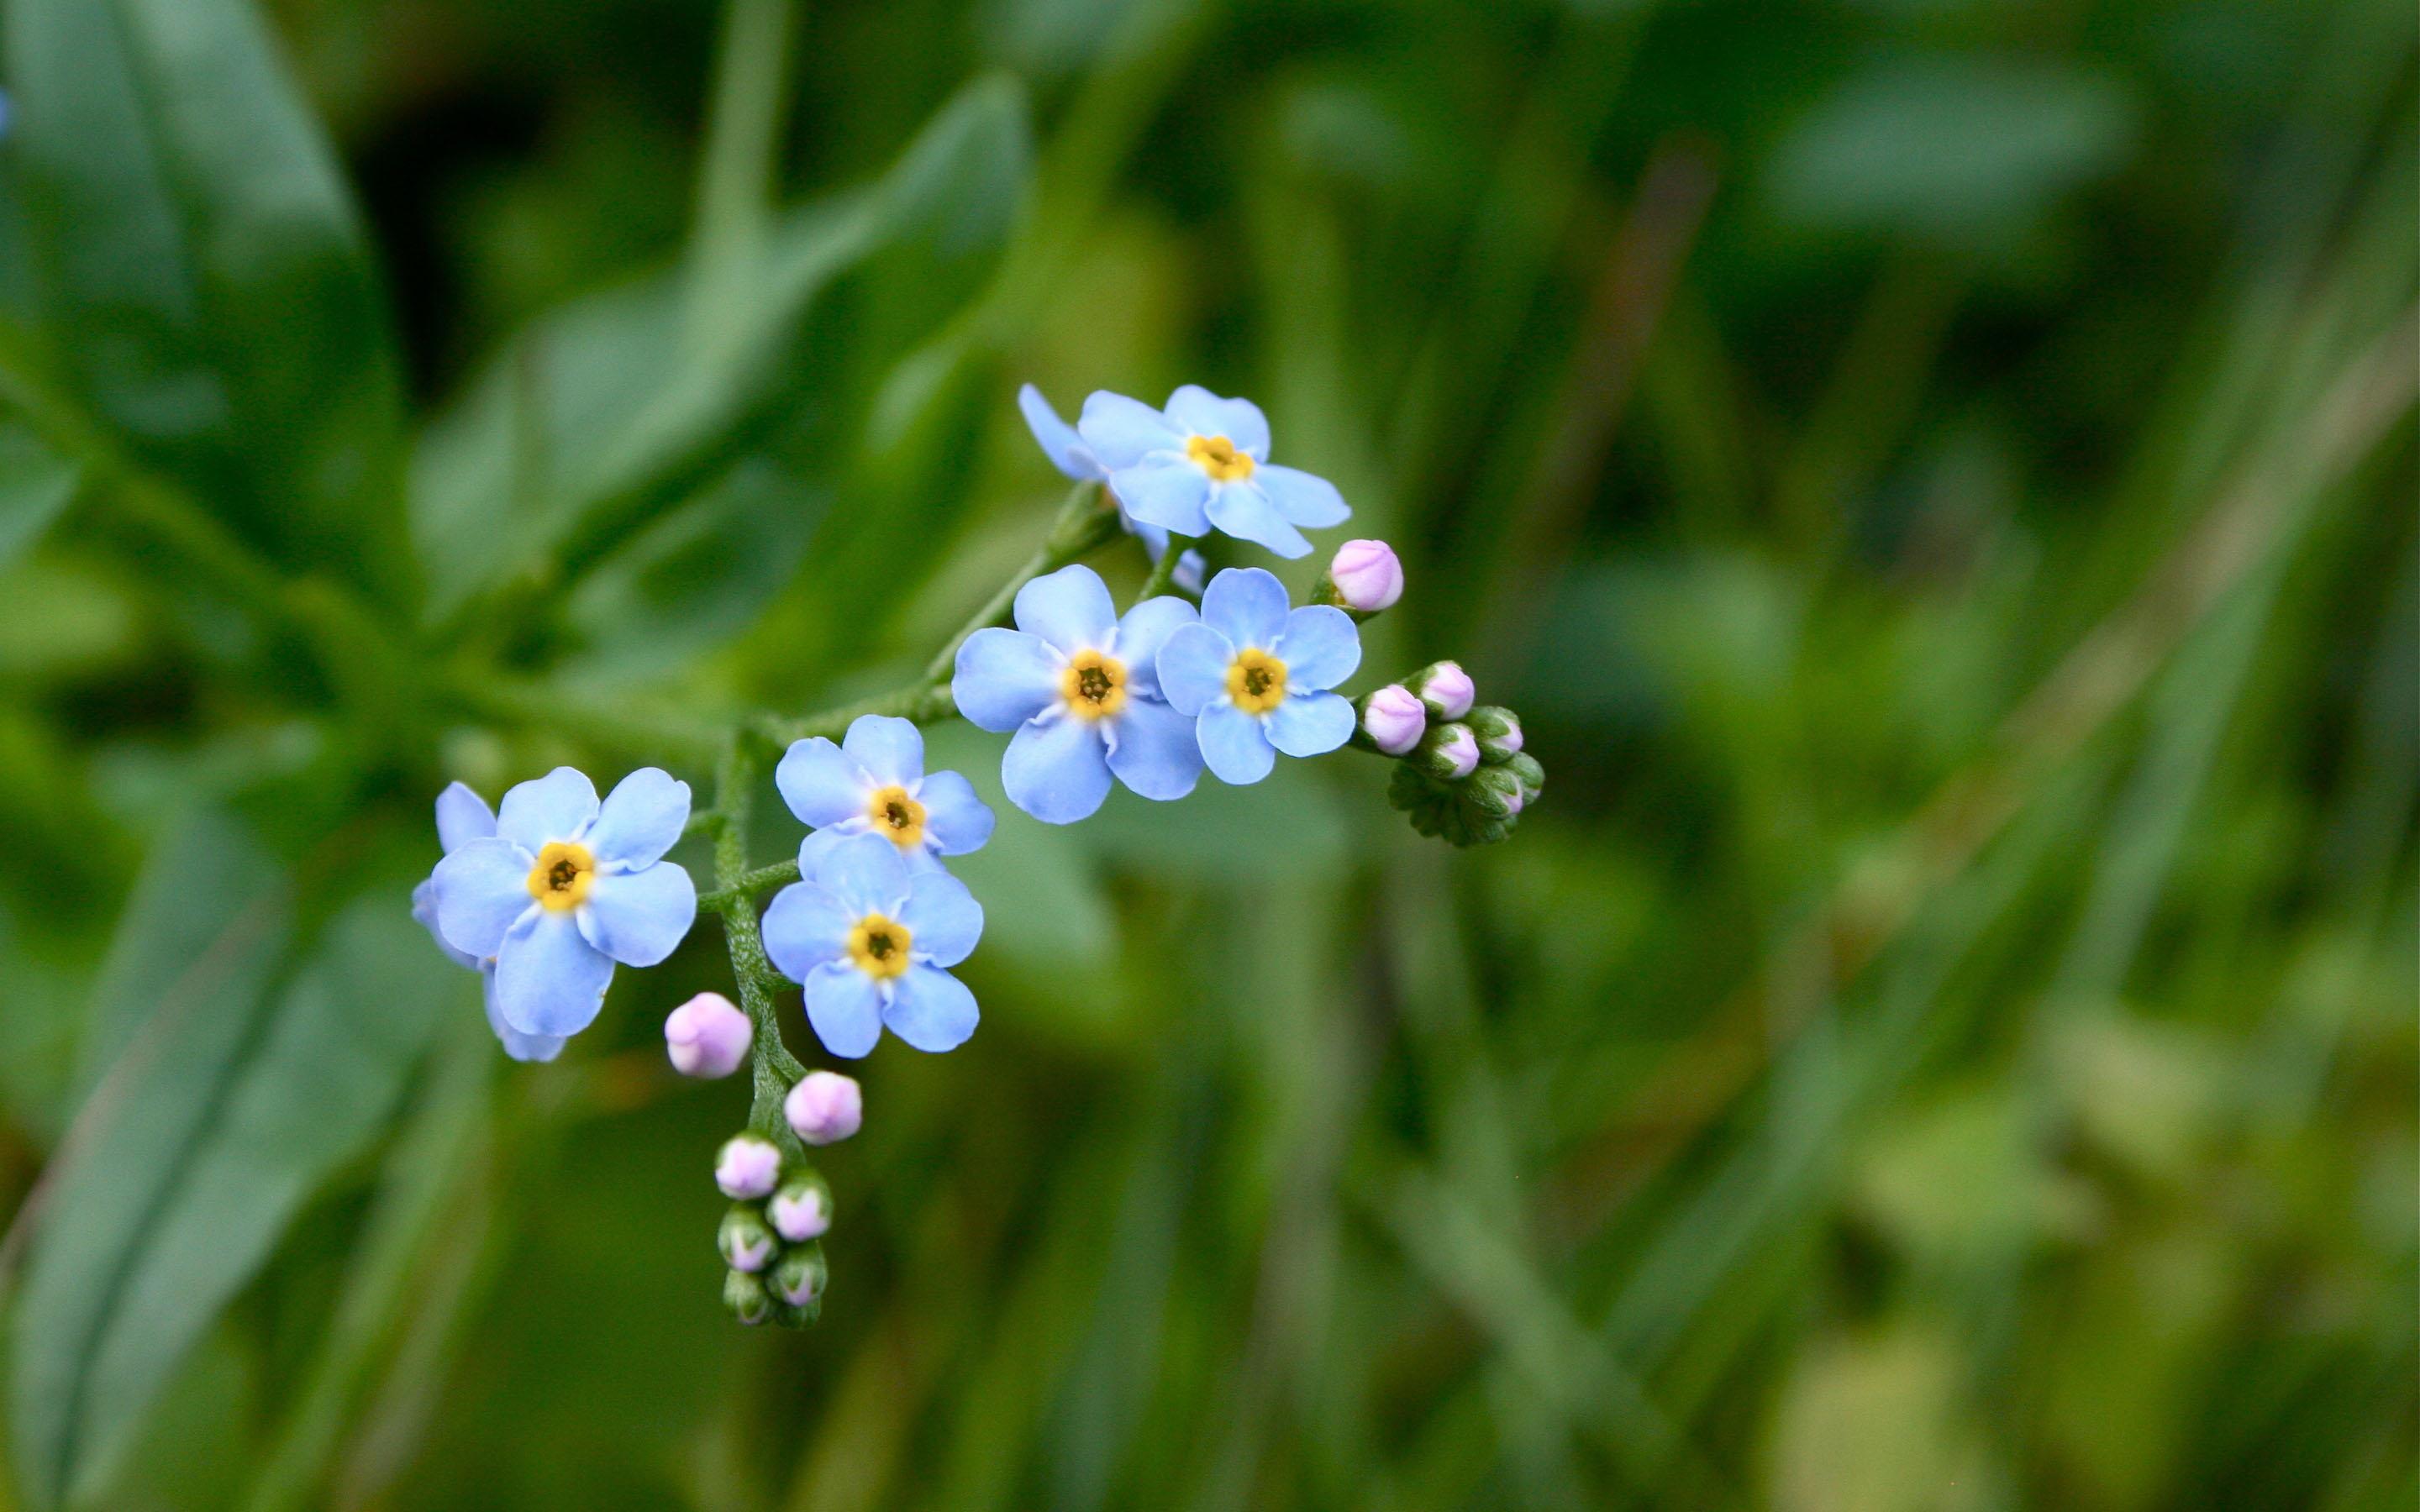 Liked Like Share - Forget Me Not Sprig , HD Wallpaper & Backgrounds